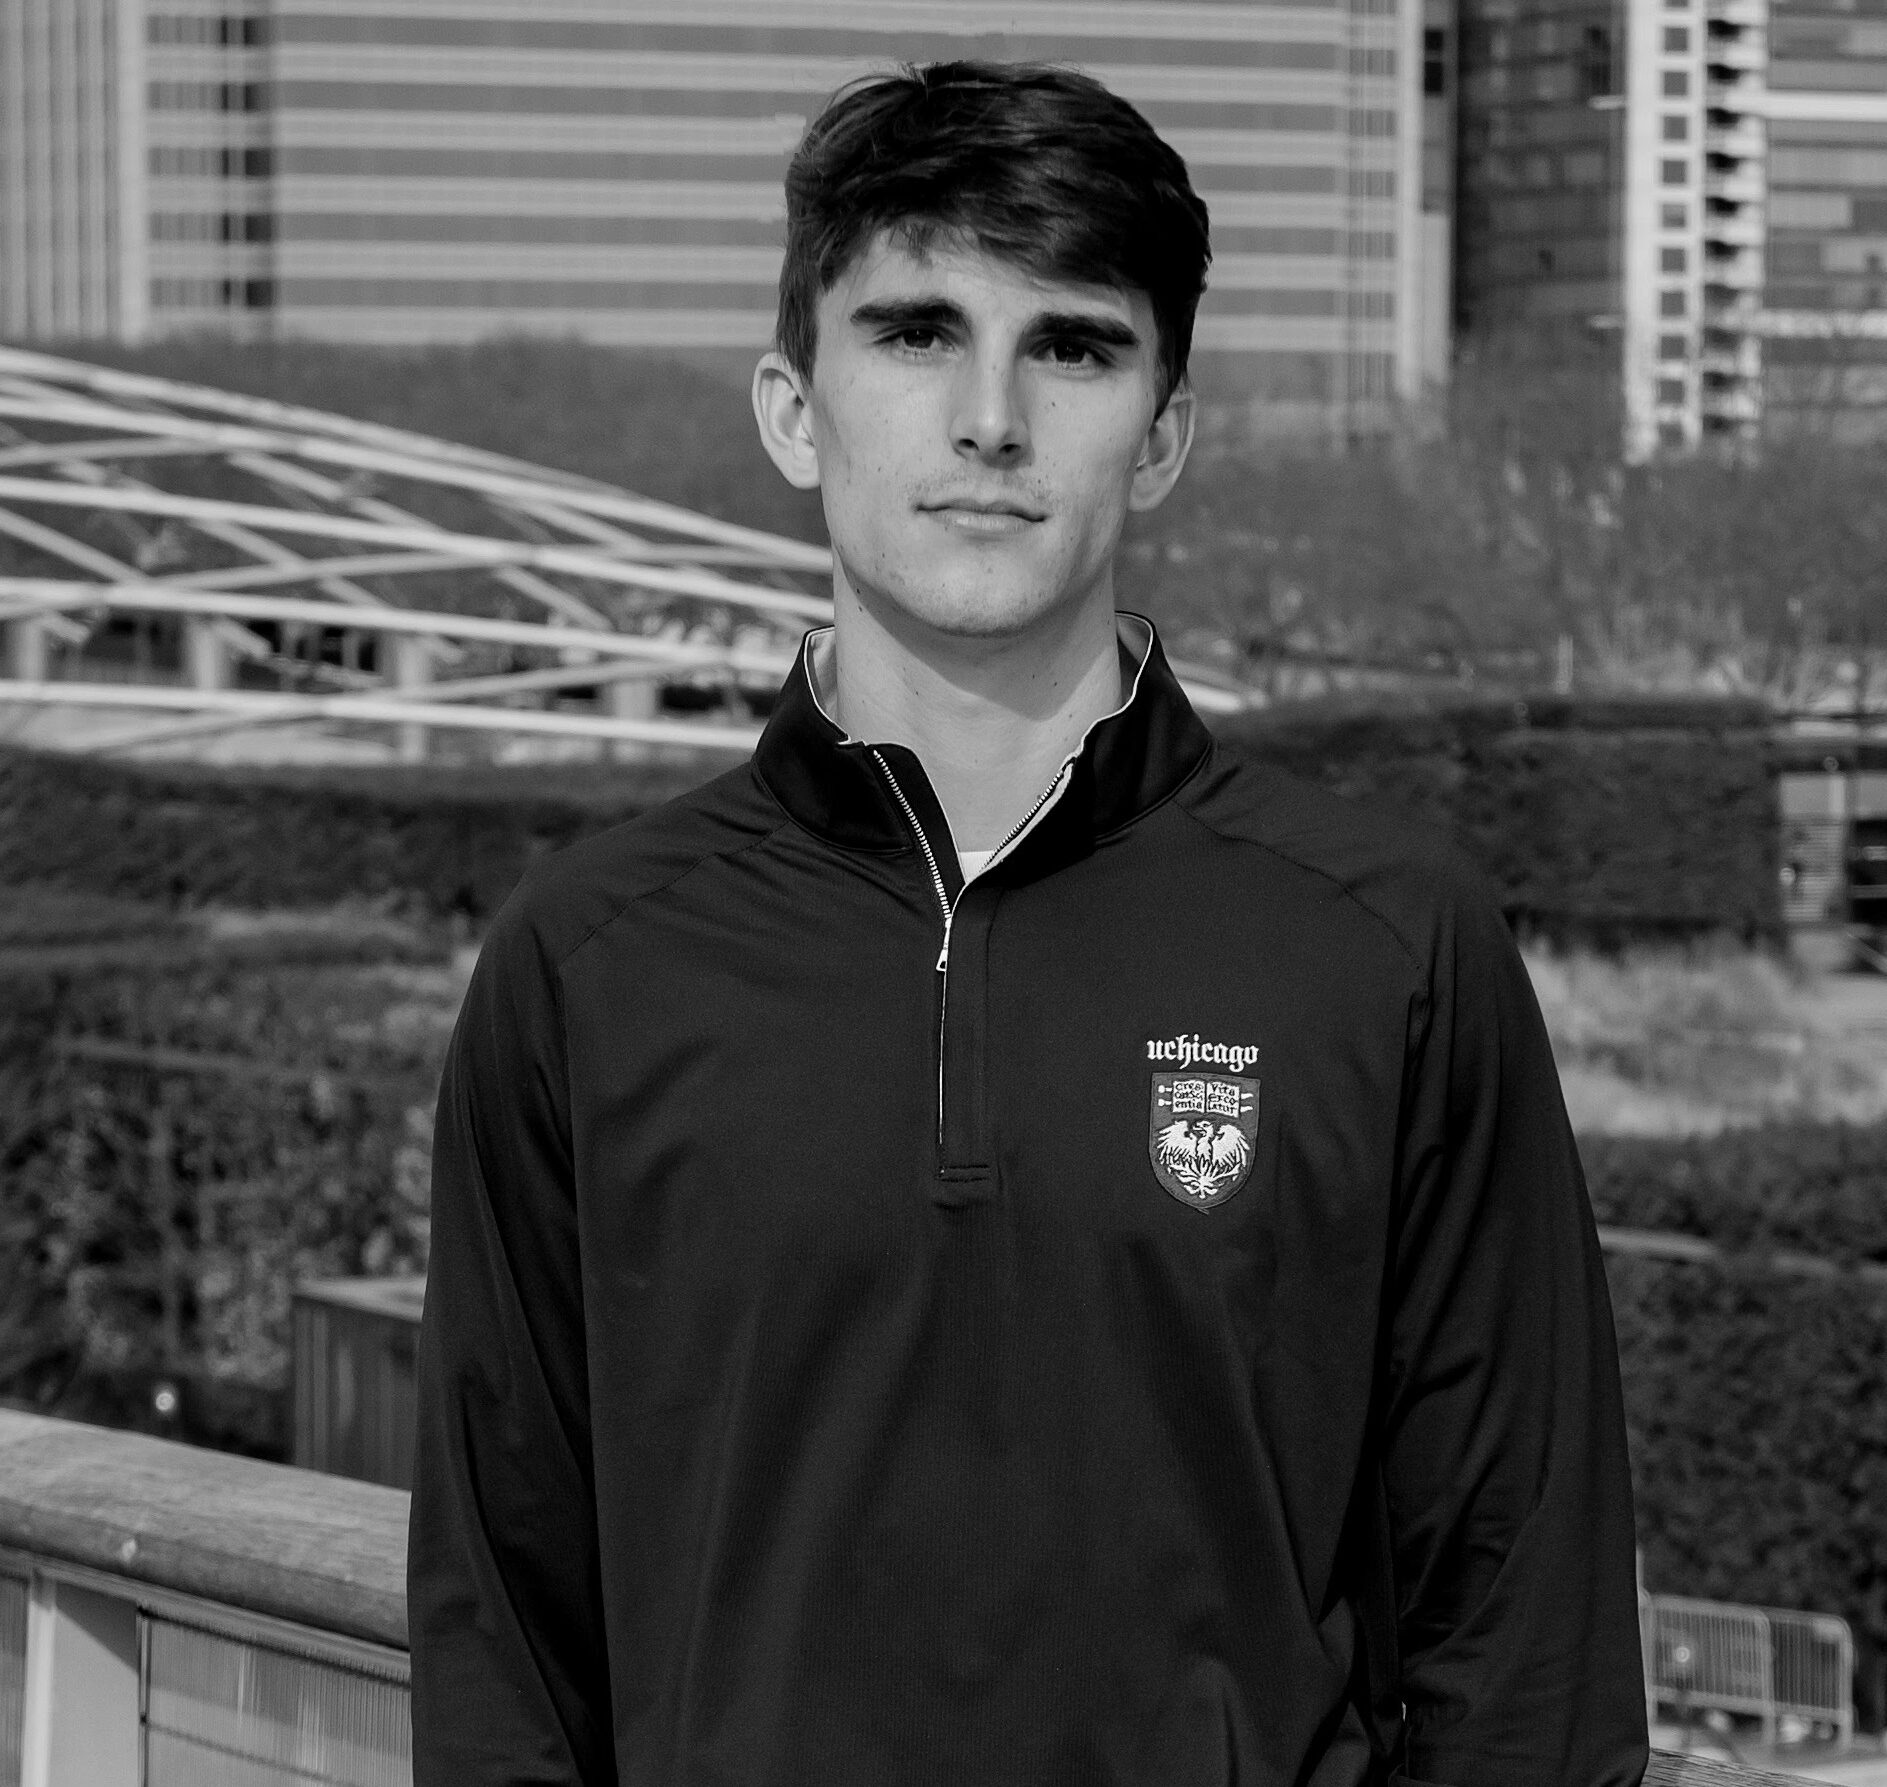 Luke Johnson, Communications and Outreach Coordinator for CIRCE, in black and white, UChicago quarter zip